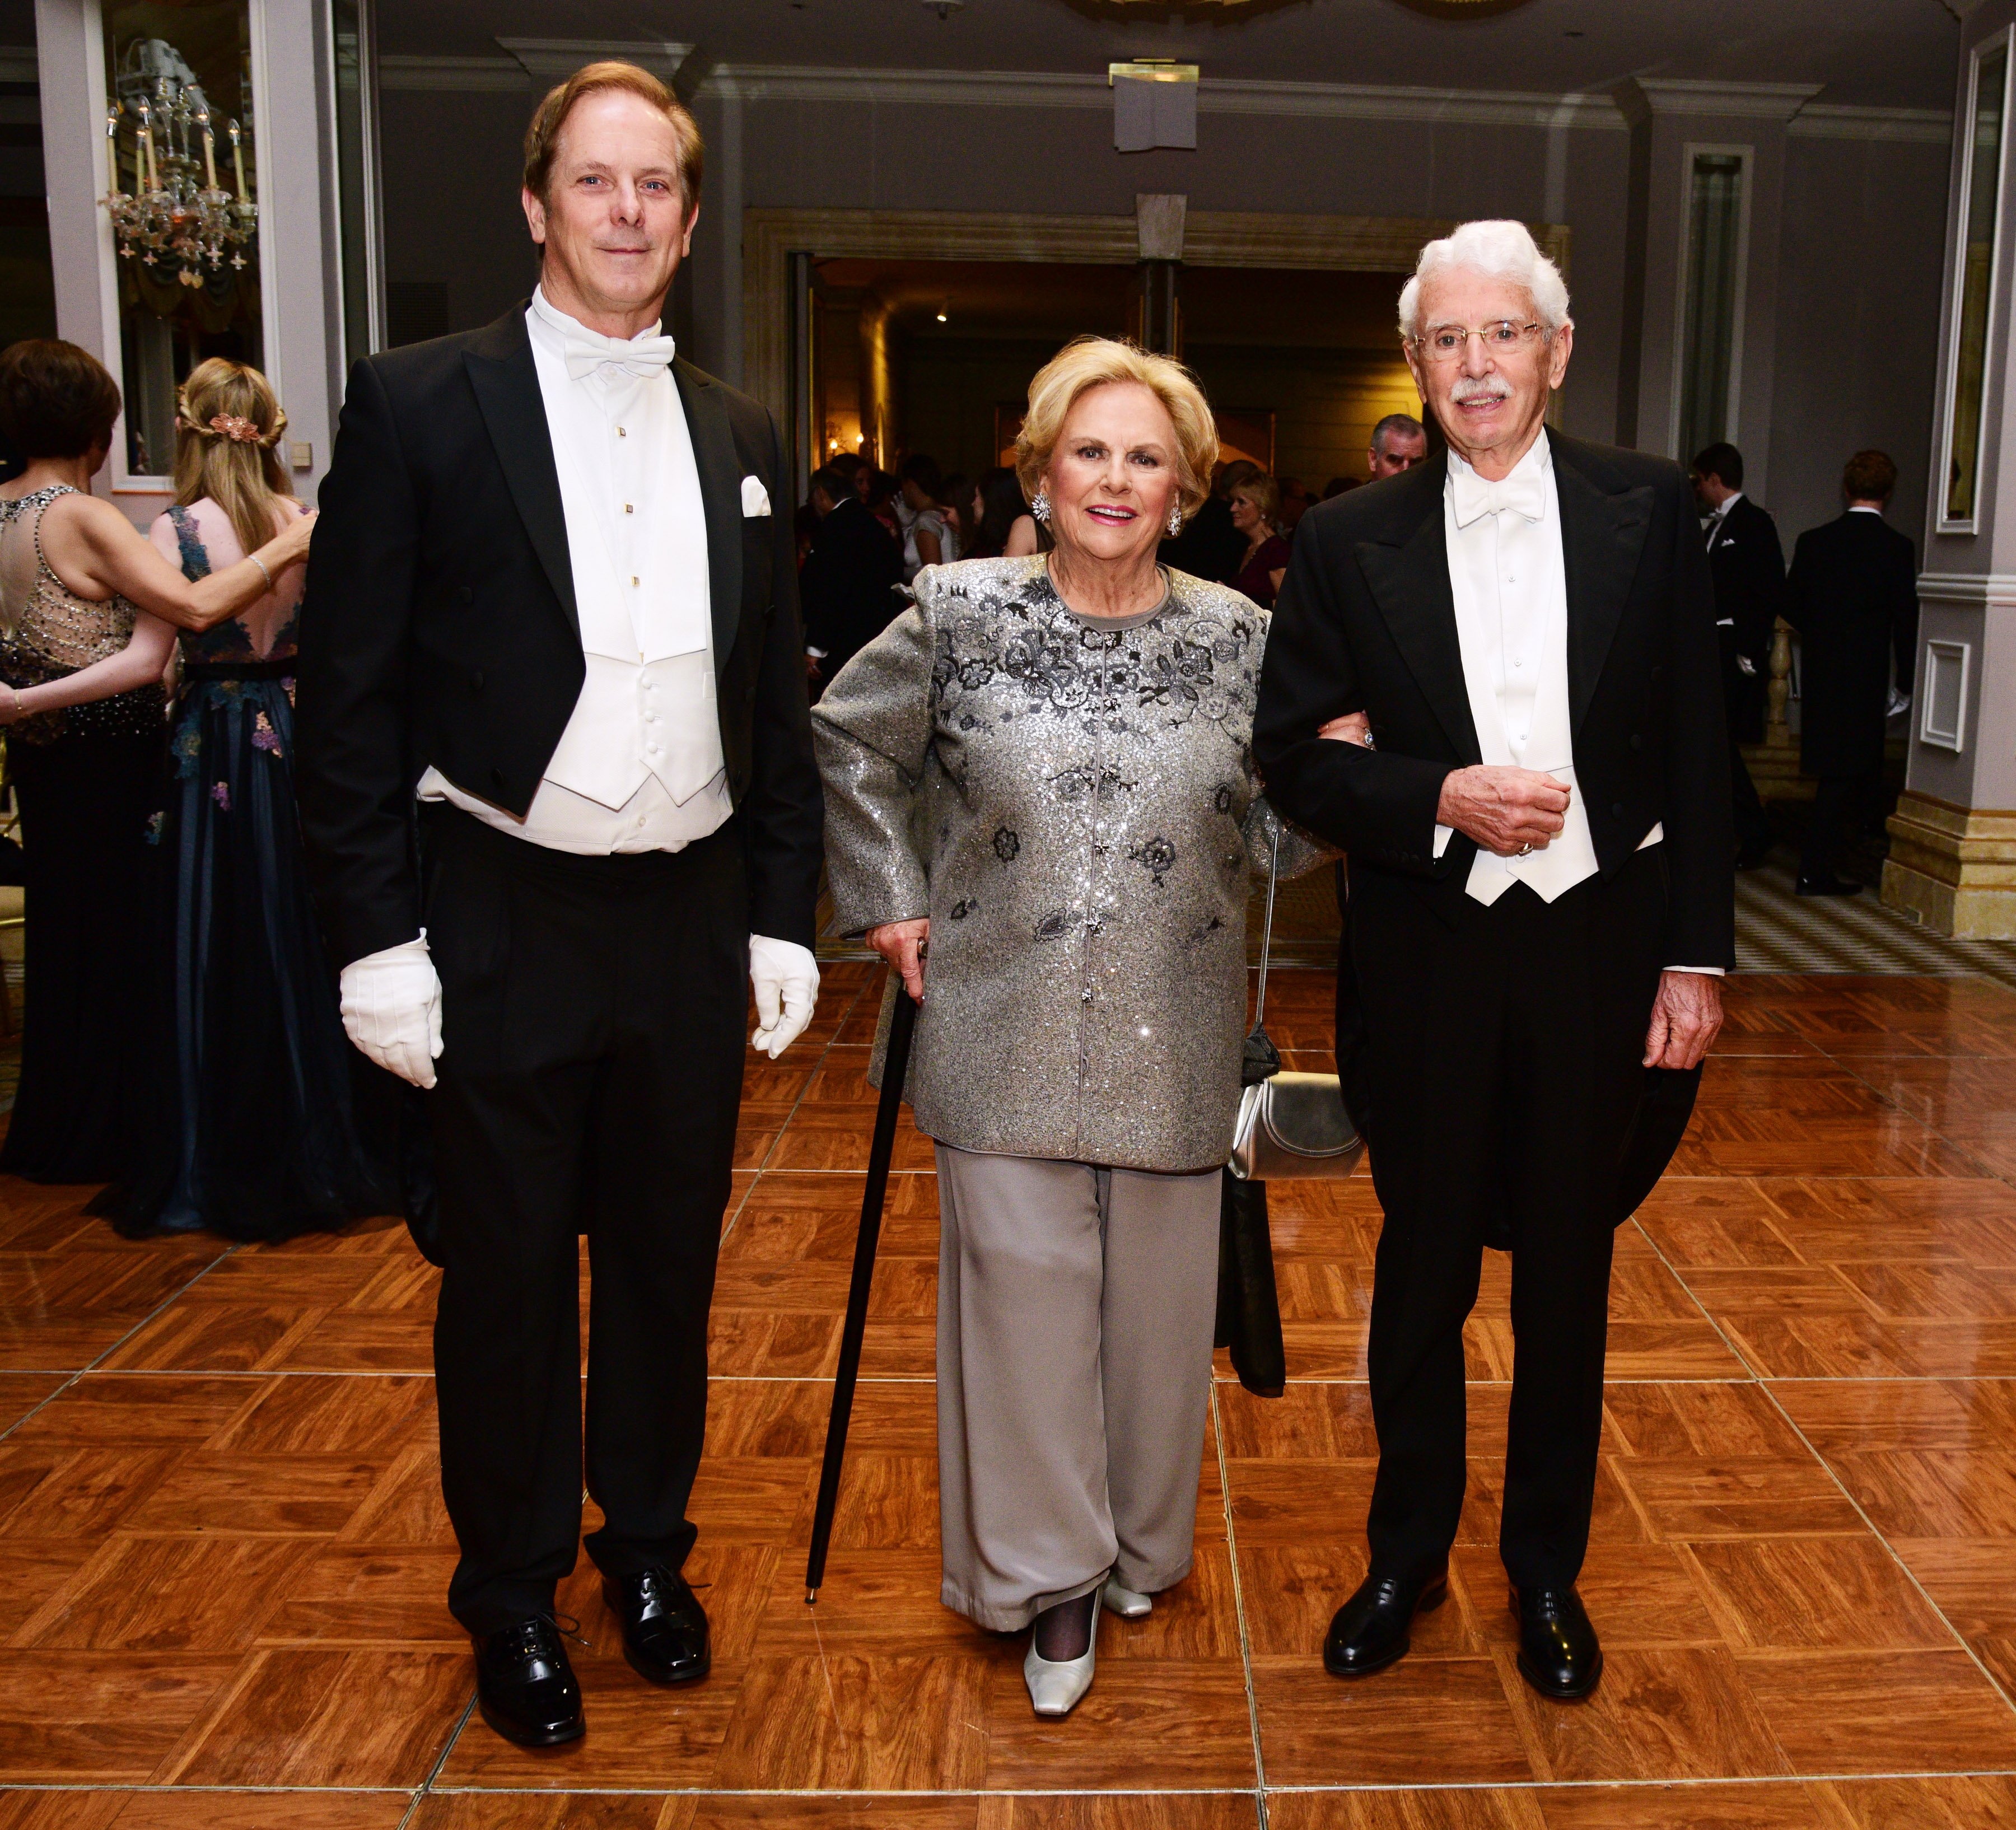 hayne Doty, Jacqueline Mars and David Badger attend The International Debutante Ball at The Pierre Hotel on December 29, 2018 in New York City.  | Photo: GettyImages